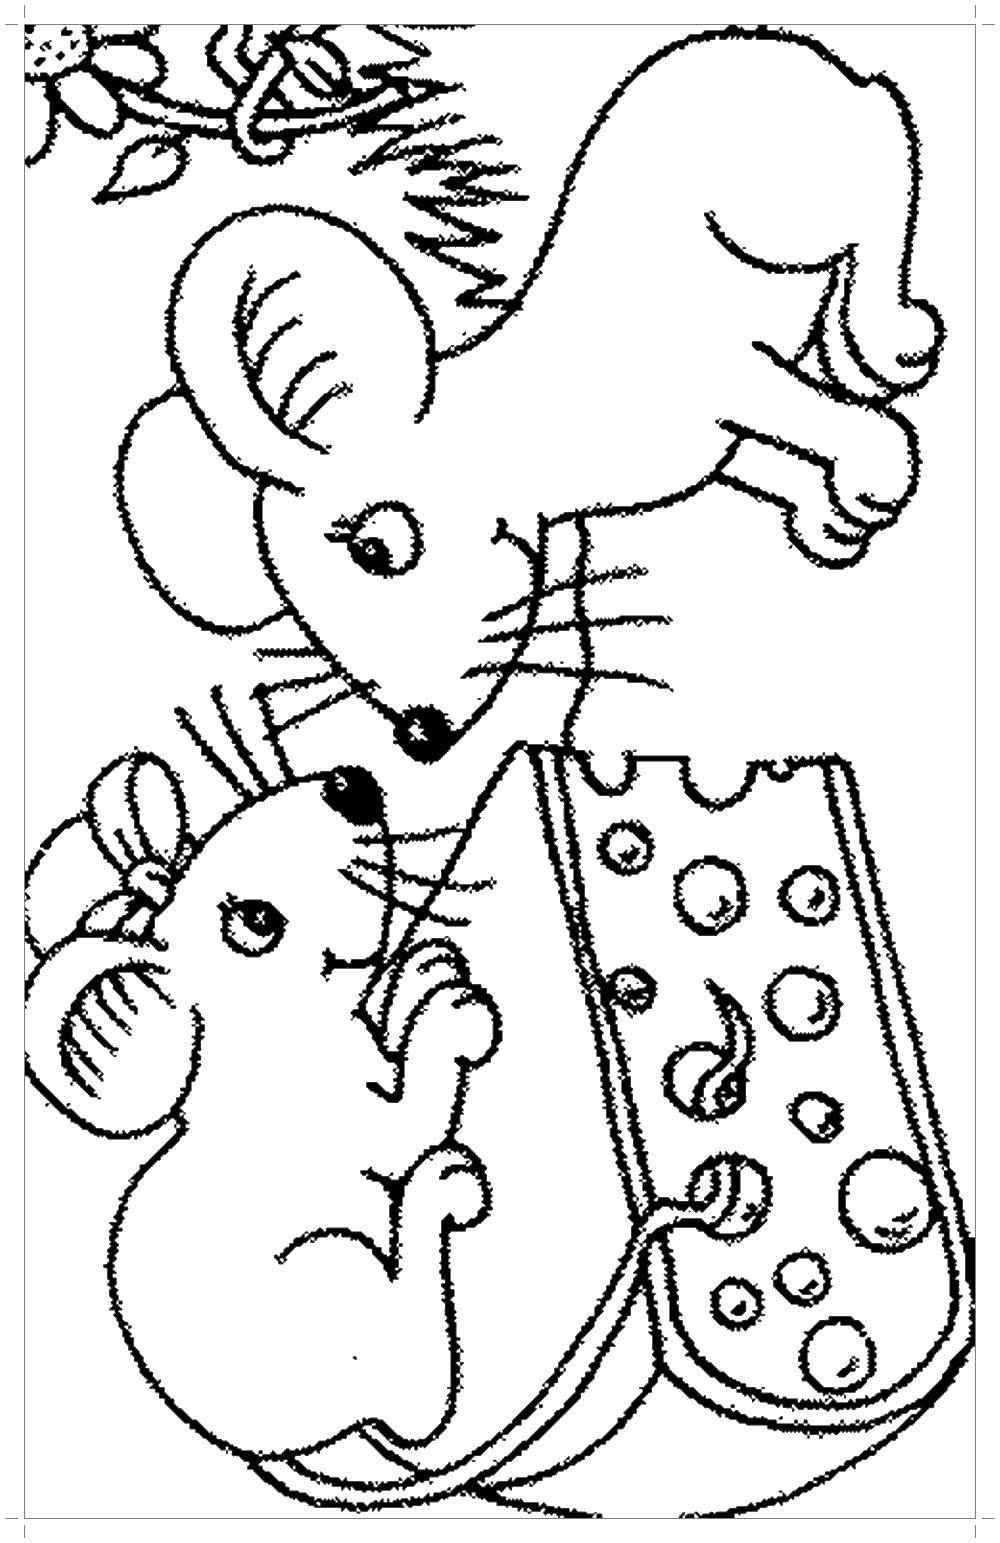 Coloring Mouse and cheese. Category mouse. Tags:  Mouse, animals.